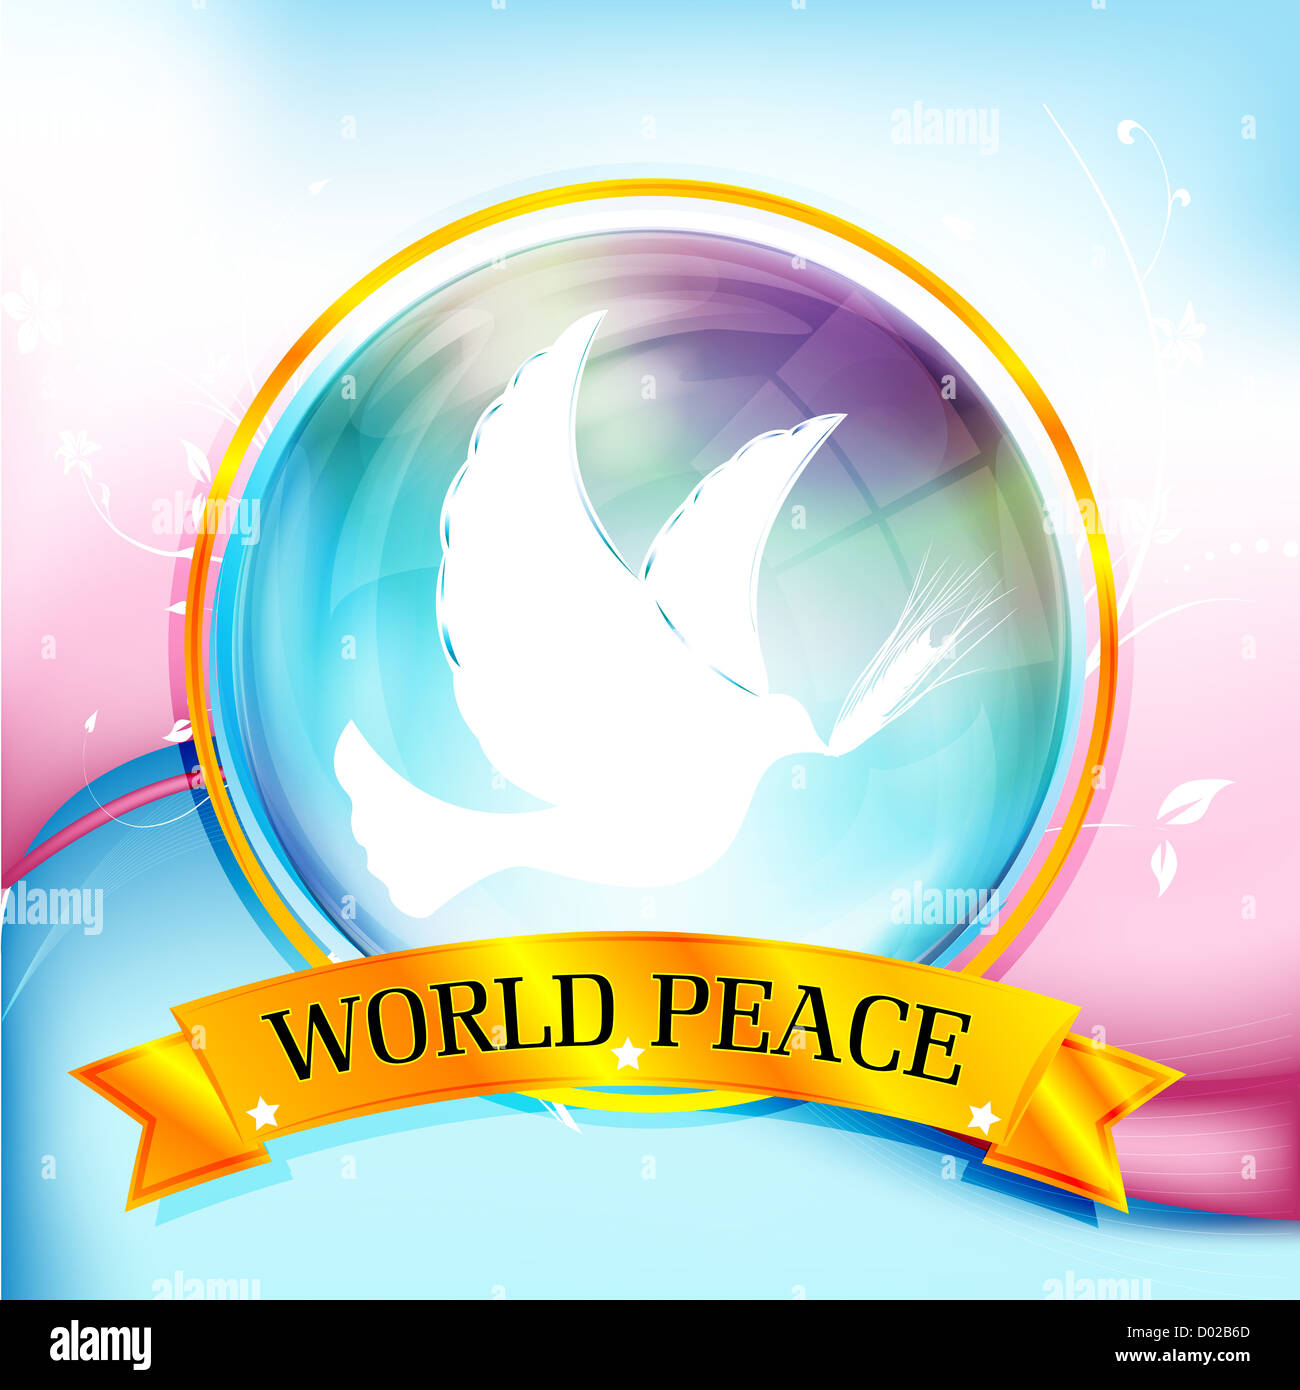 illustration of world peace with bird on colorful background Stock Photo